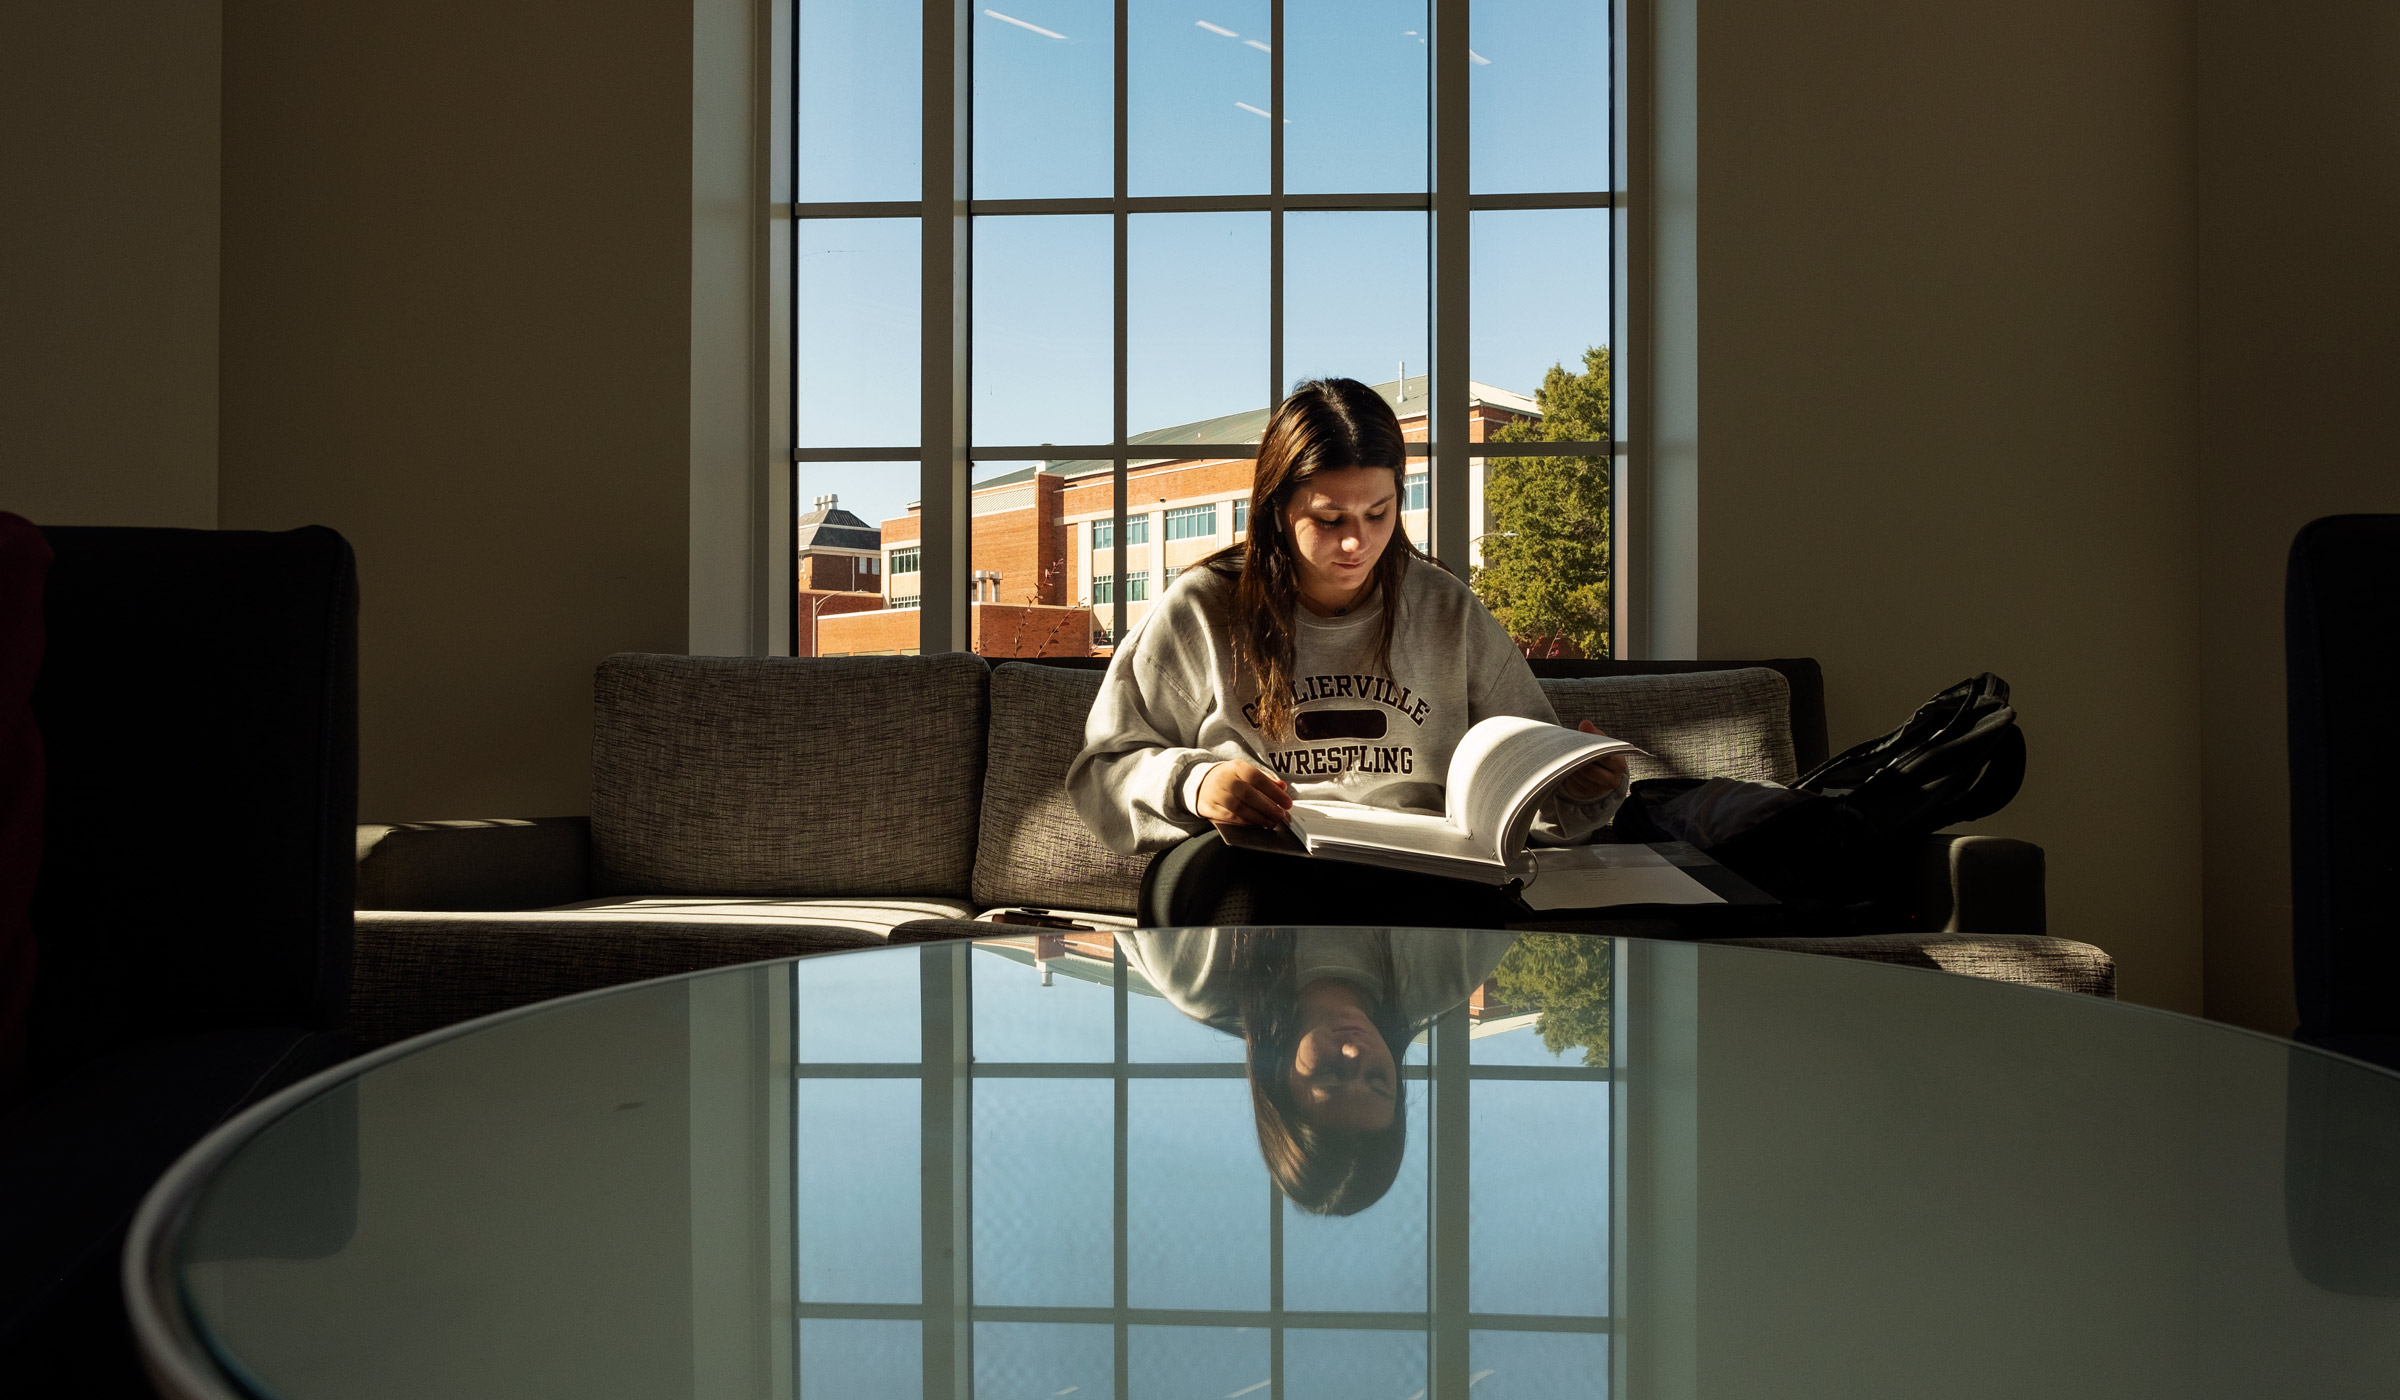 A student reads while sitting on a couch in the Rula atrium, with she and the window behind her reflected on a table in the foregound.